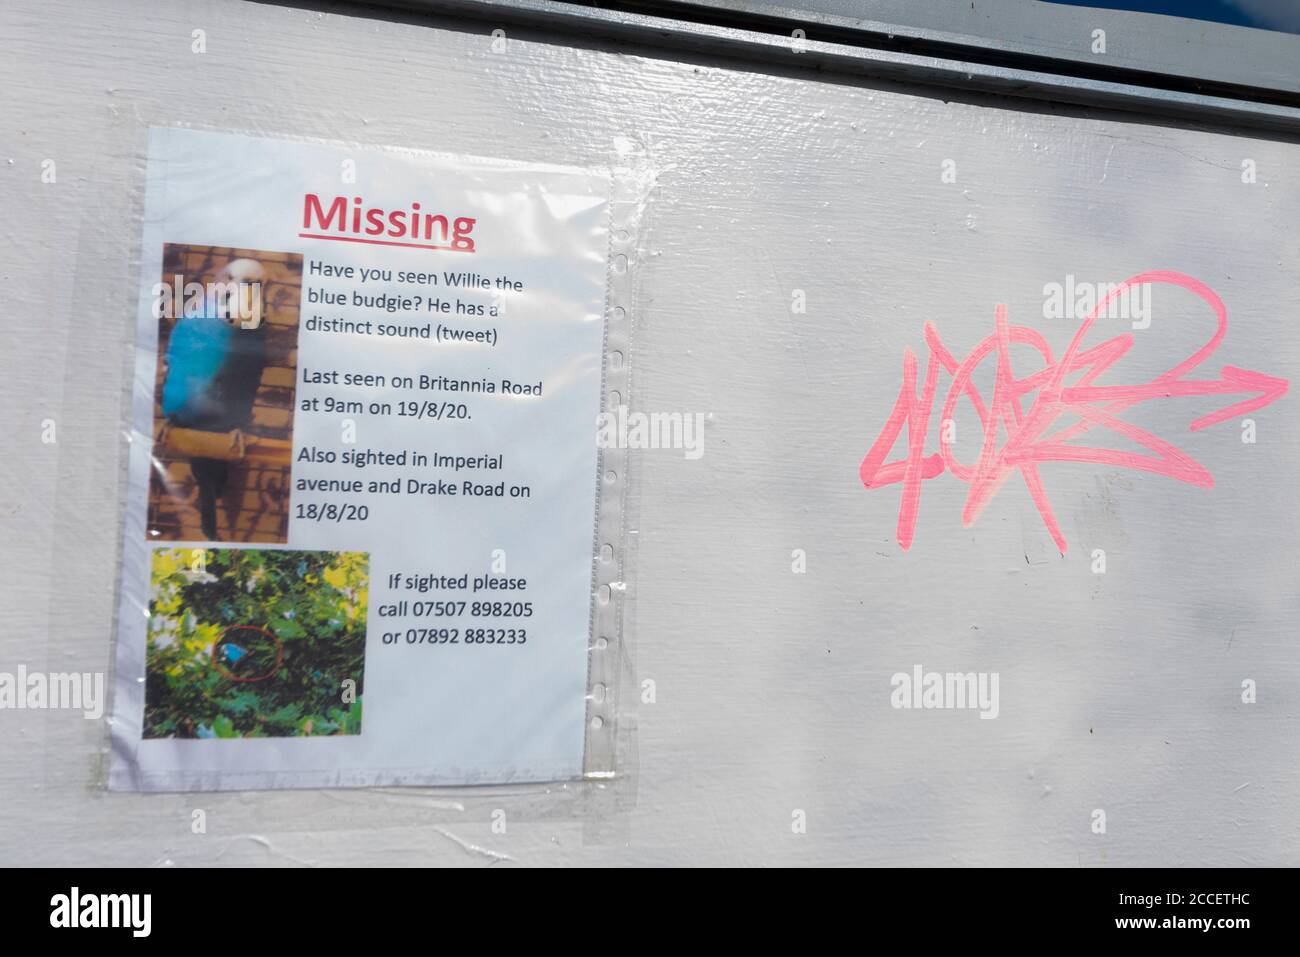 Missing budgie sign in Westcliff on Sea, Essex, UK. Printed private notice taped to sign with graffiti looking for Willie the budgerigar. Pet bird Stock Photo